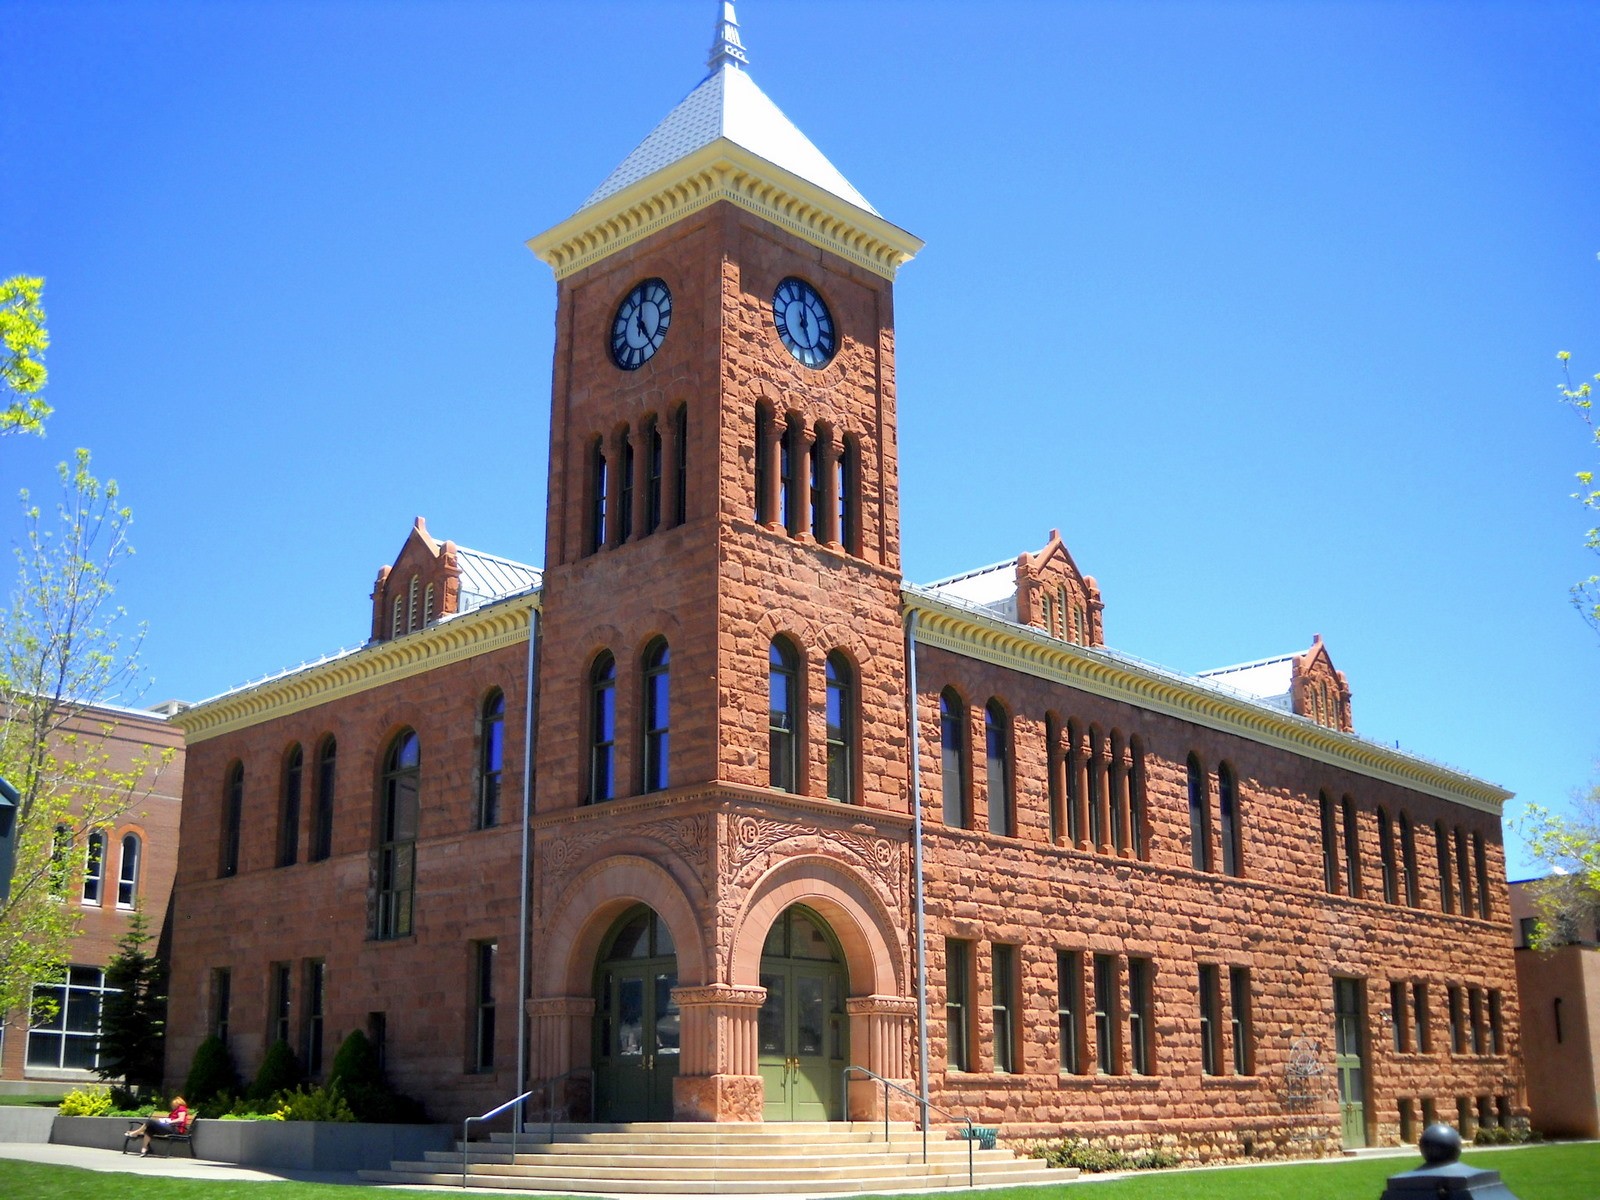 Flagstaff Justice Court Image, R&amp;R Law Group